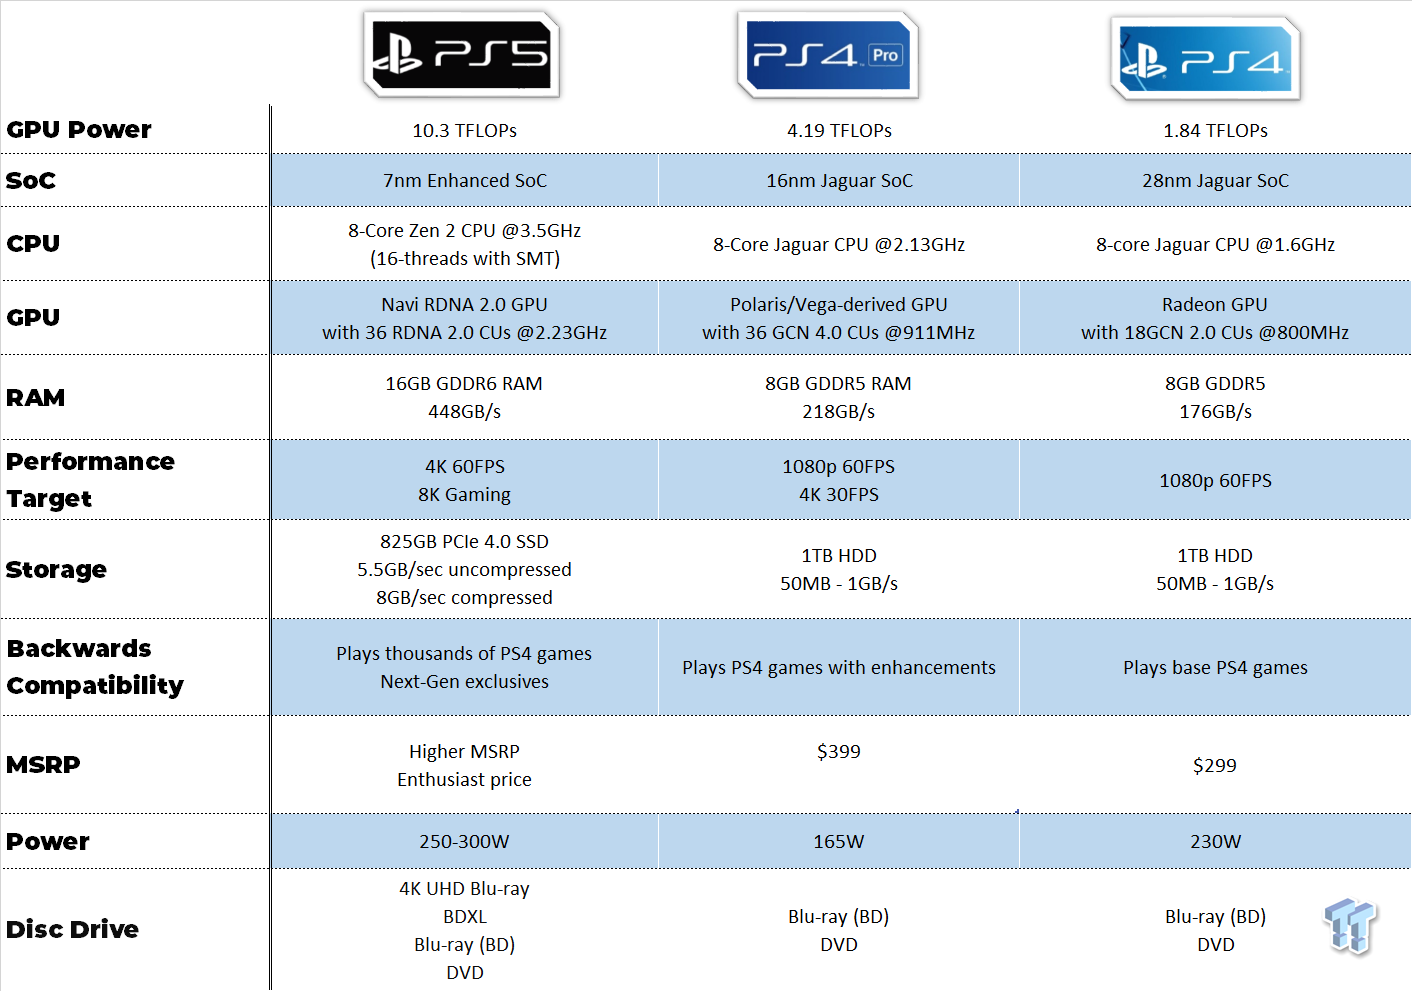 playstation 5 production numbers